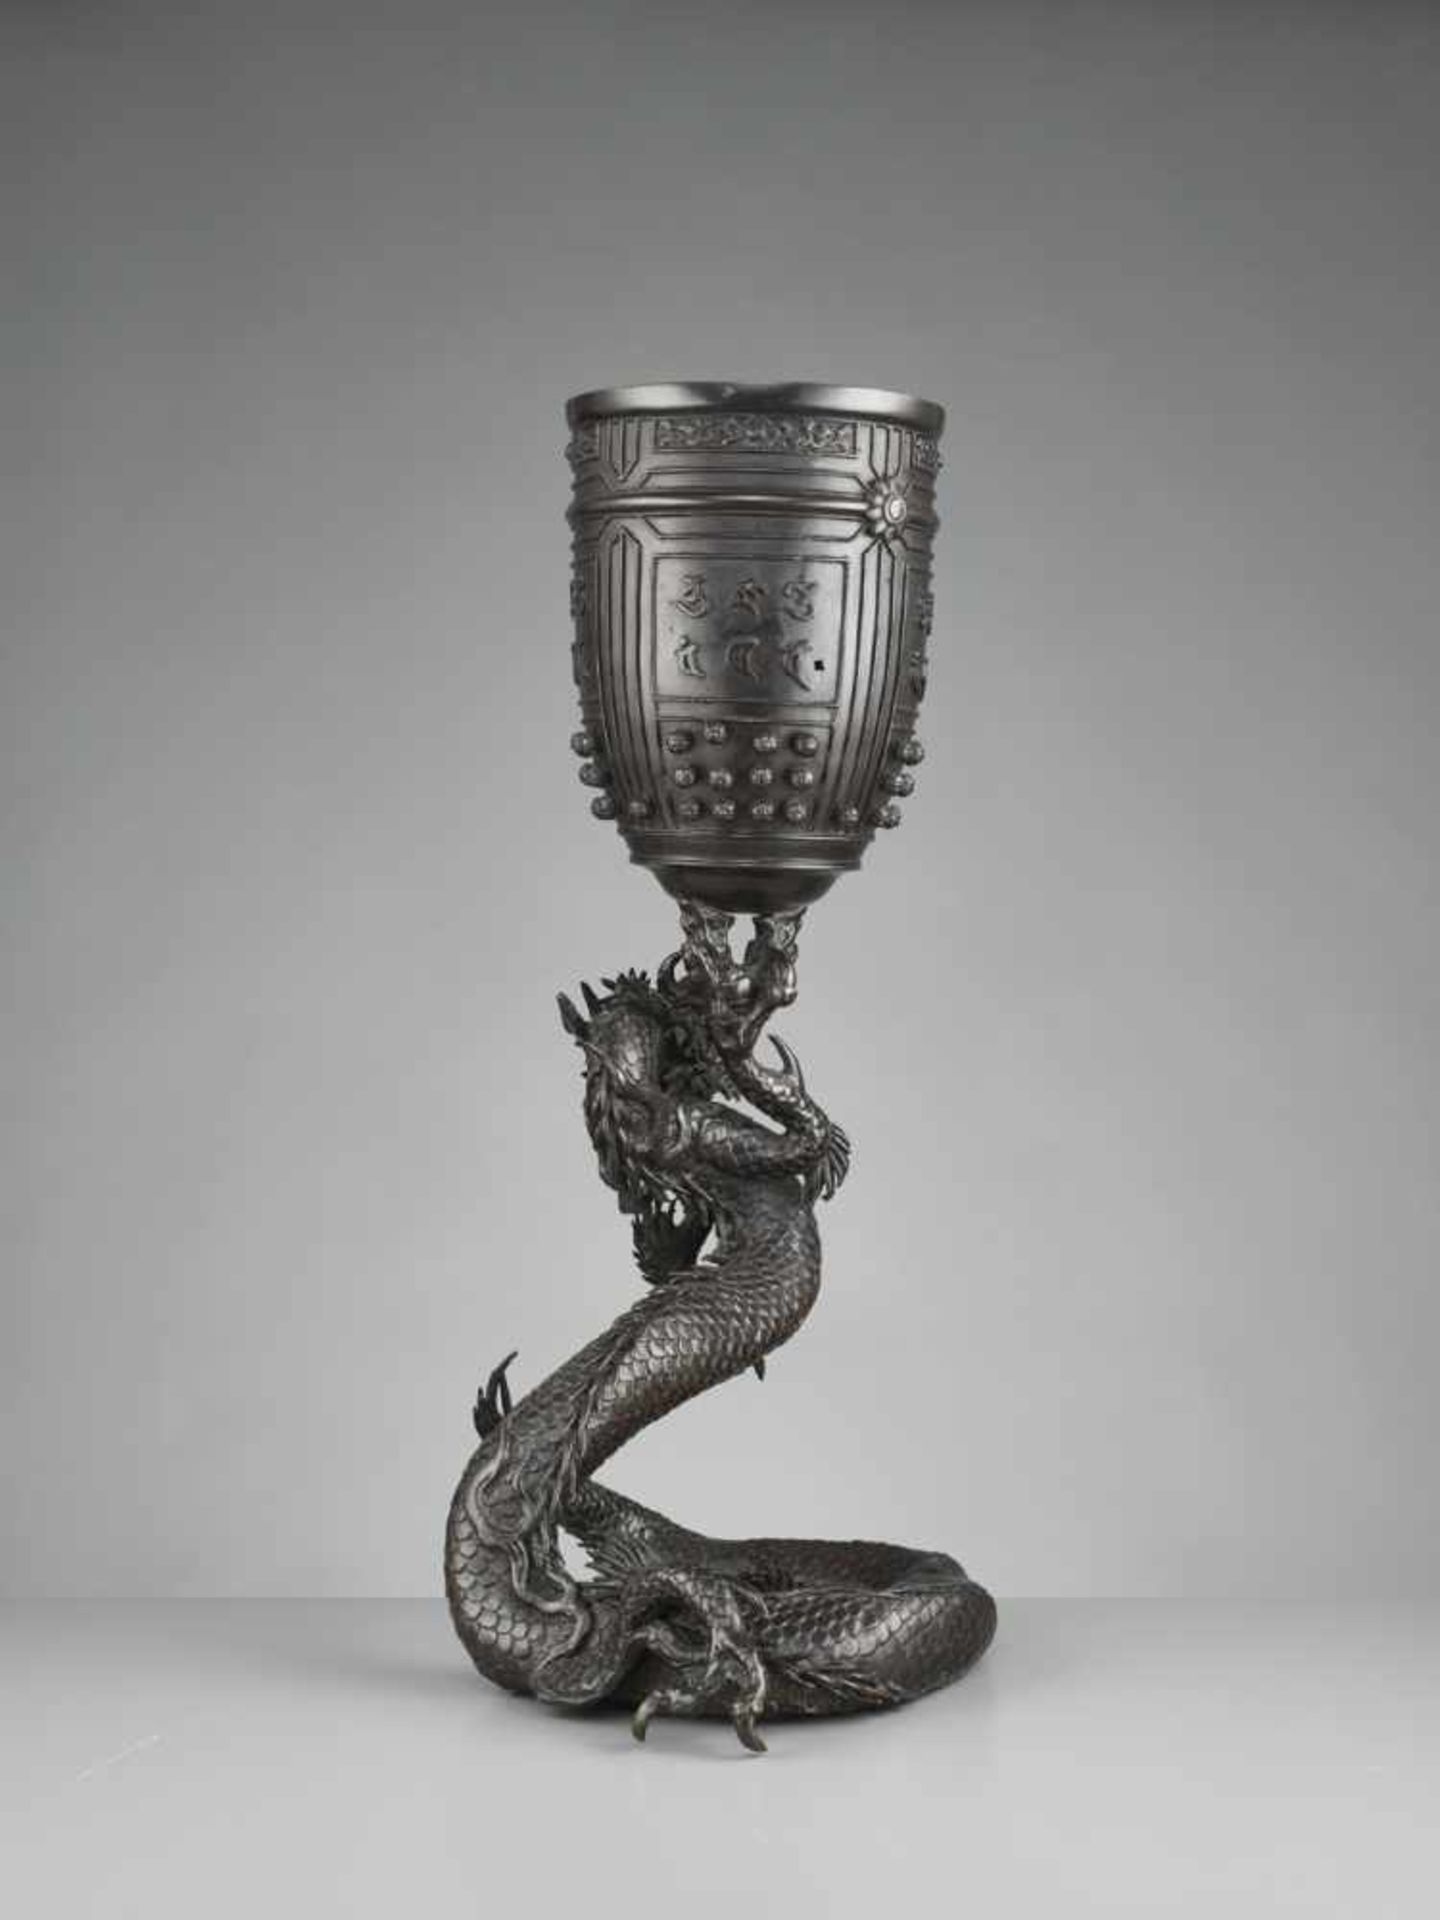 A LARGE AND MASSIVE DRAGON AND TEMPLE BELL BRONZE Japan, 19th century, late Edo period (1615-1868) - Image 6 of 10